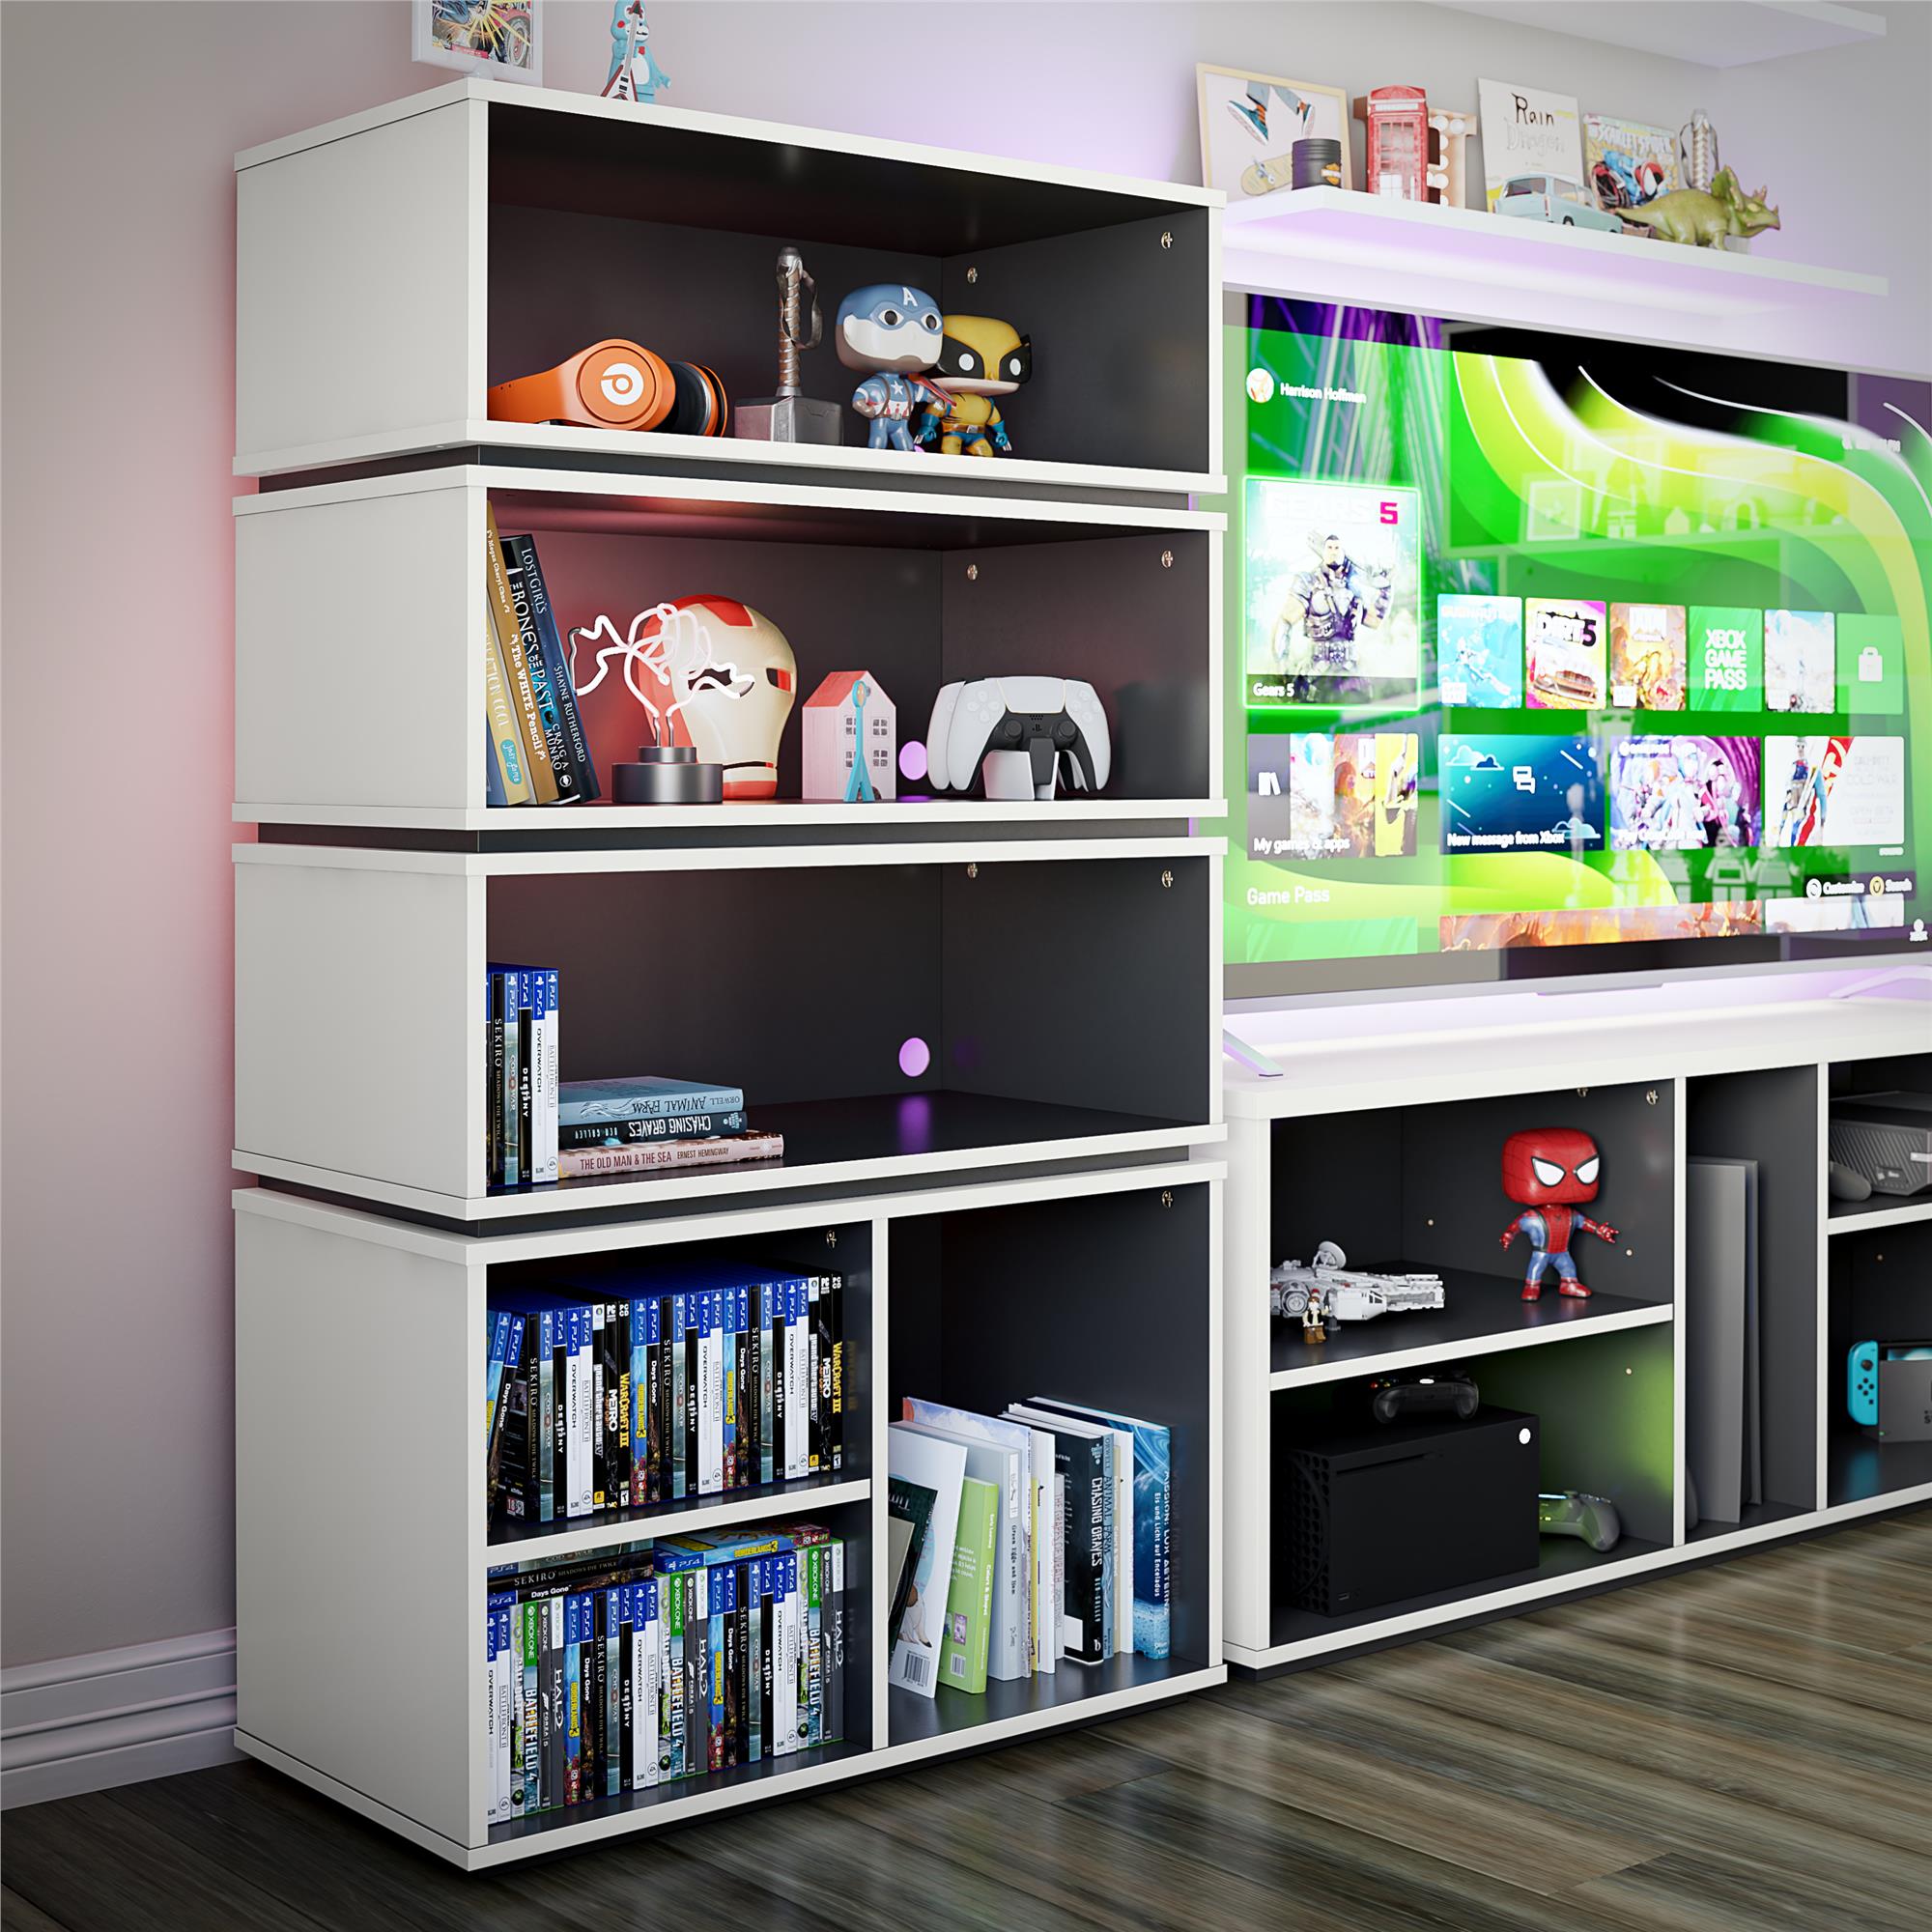 NTense Eclipse Gaming & Collectable Display Storage Bookcase, White and Charcoal - image 2 of 15